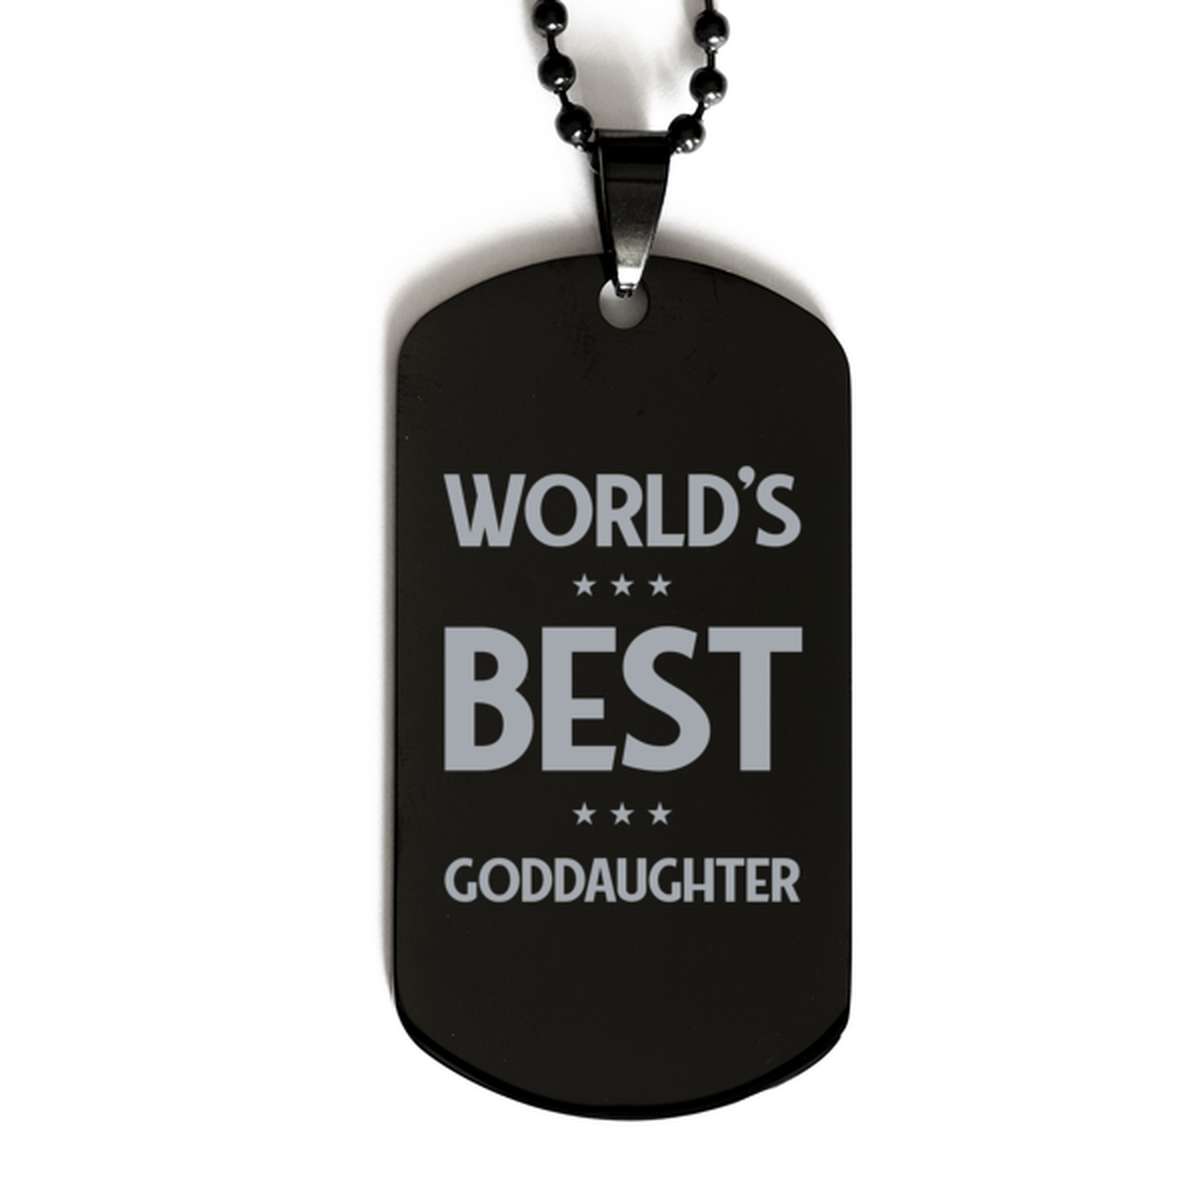 Worlds Best Goddaughter Gifts, Funny Black Engraved Dog Tag For Goddaughter, Birthday Presents For Women